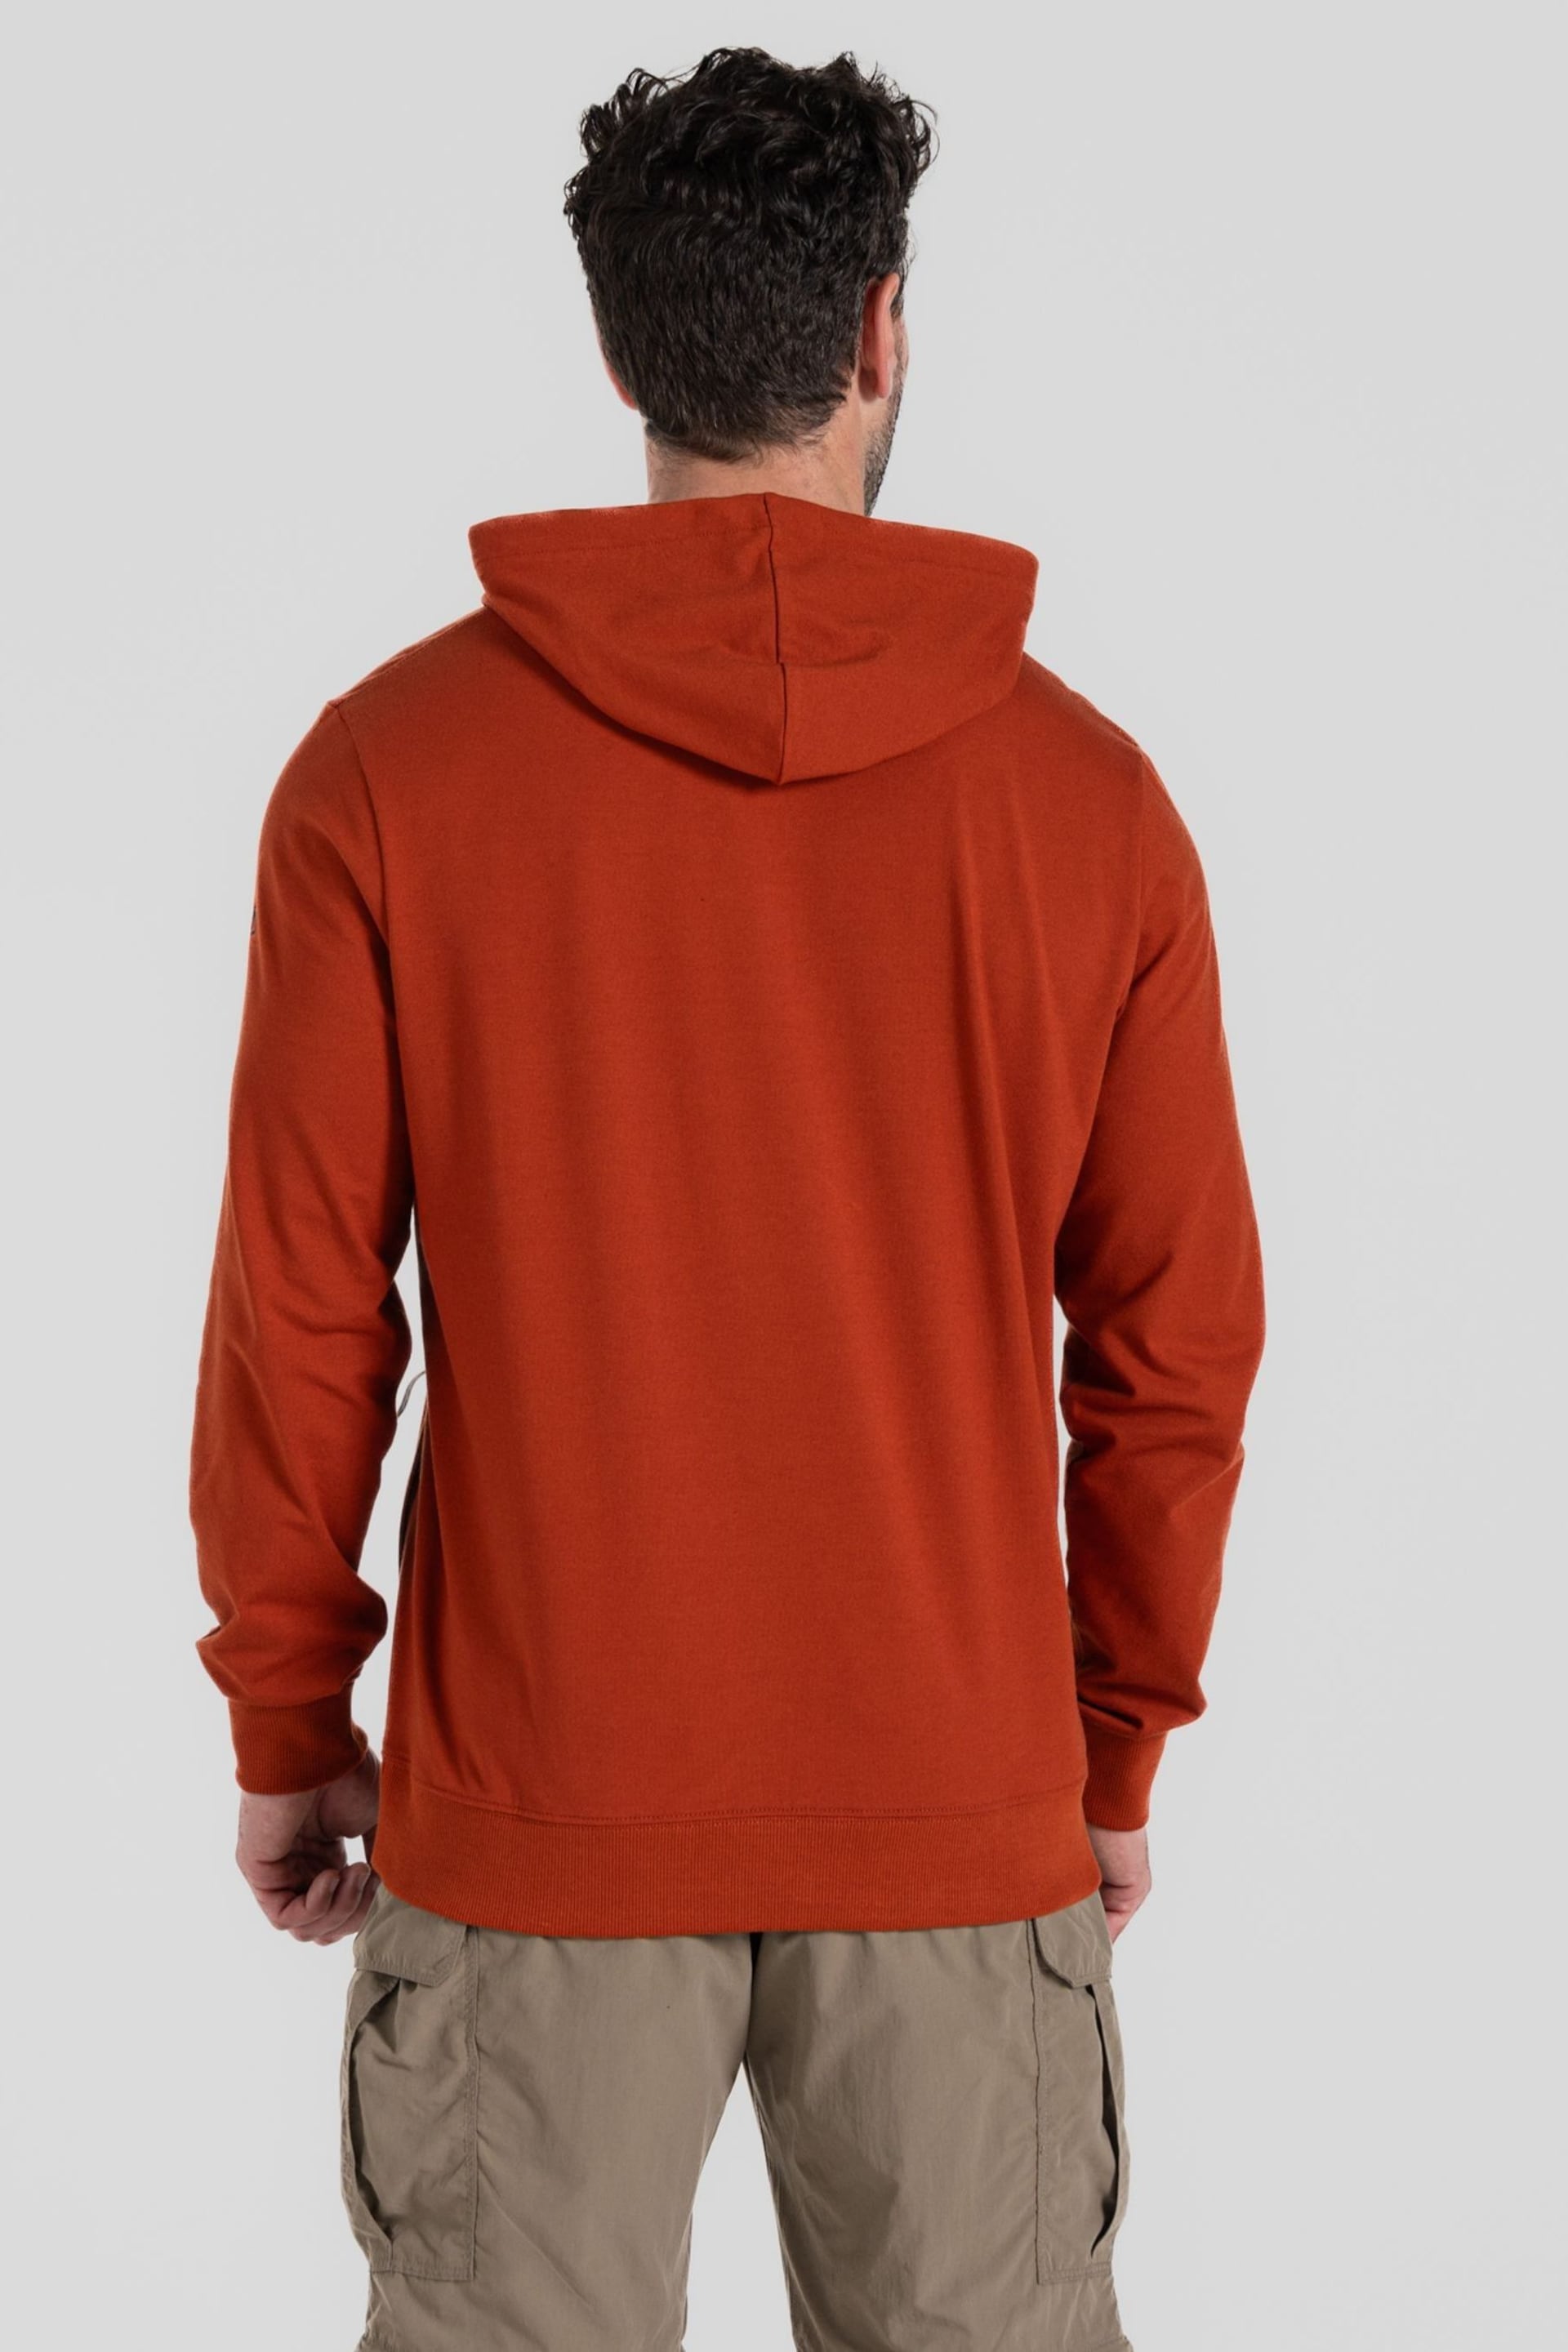 Craghoppers Red NL Tagus Hooded Top - Image 2 of 6